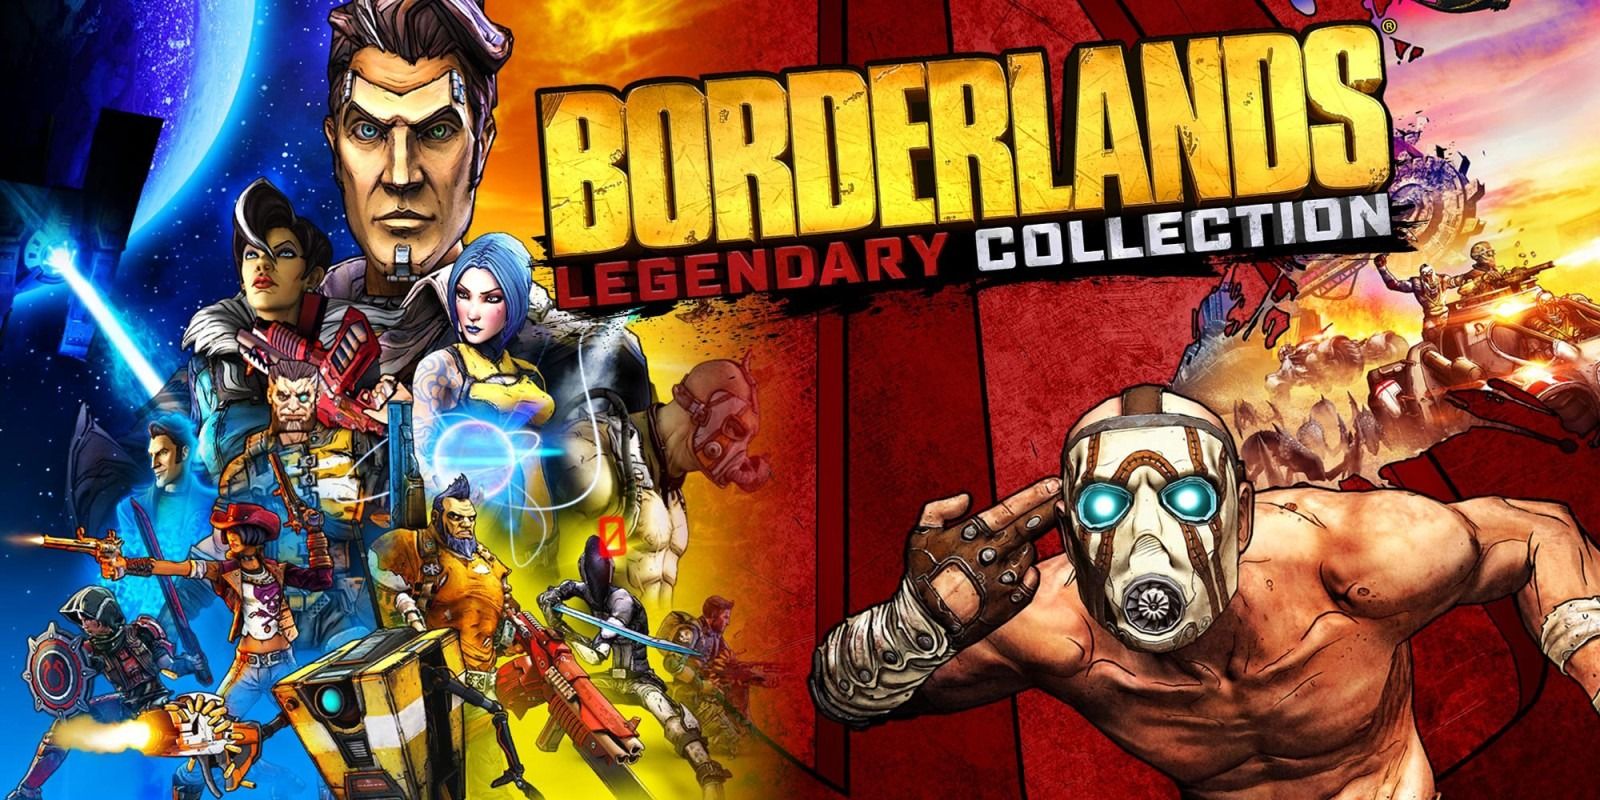 Borderlands Legendary Collection characters together in a collage